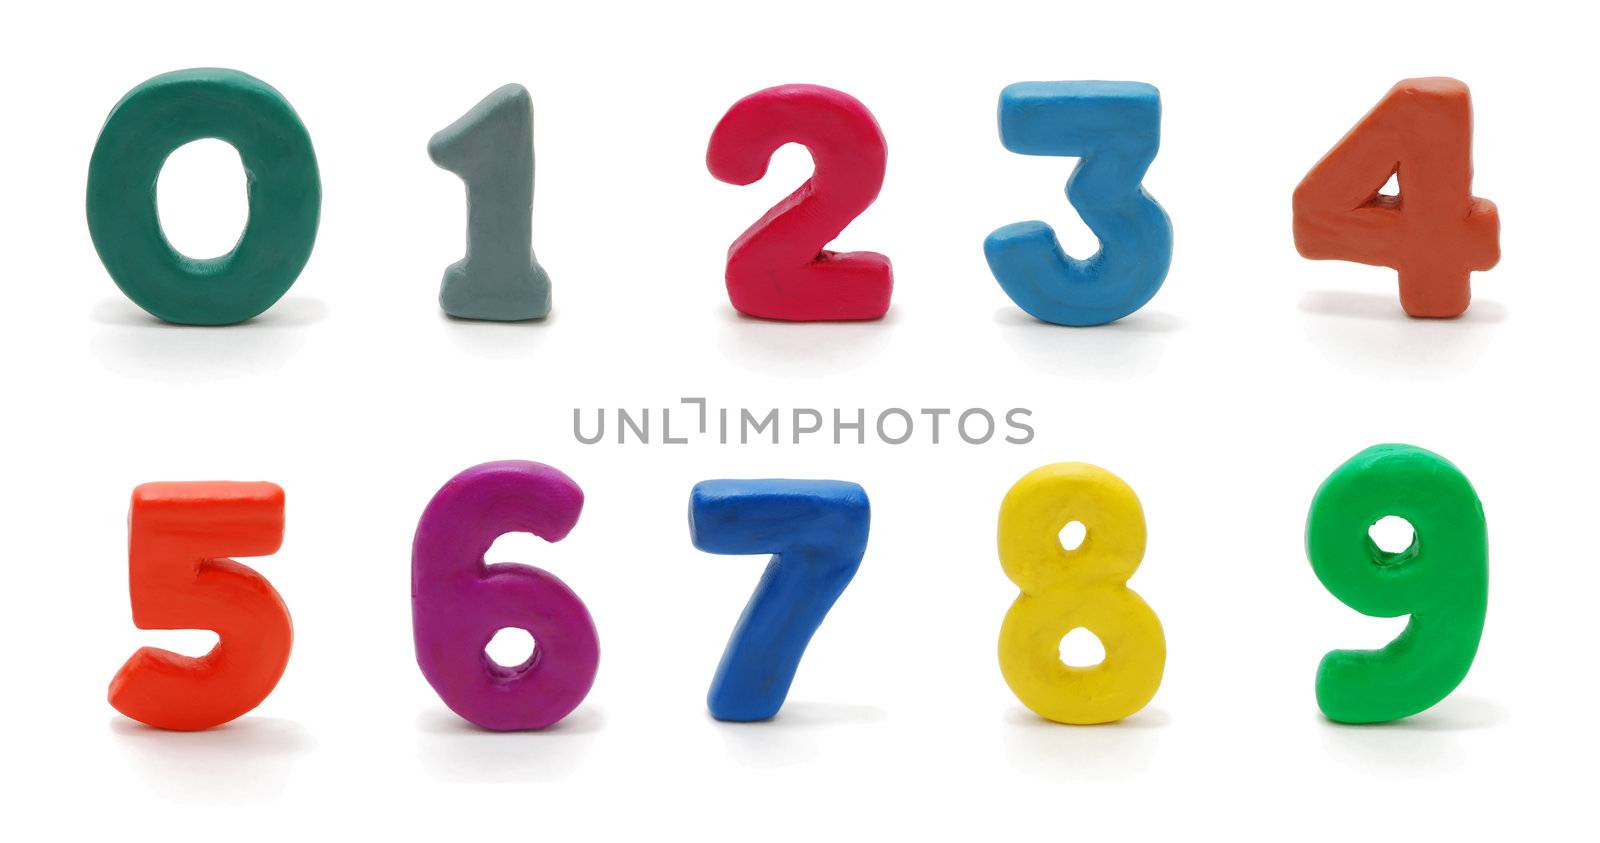 Random Colored Digits in Alphabetical Order Isolated on White (zero, one, two, three, four, fixe, six, seven, eight, nine)